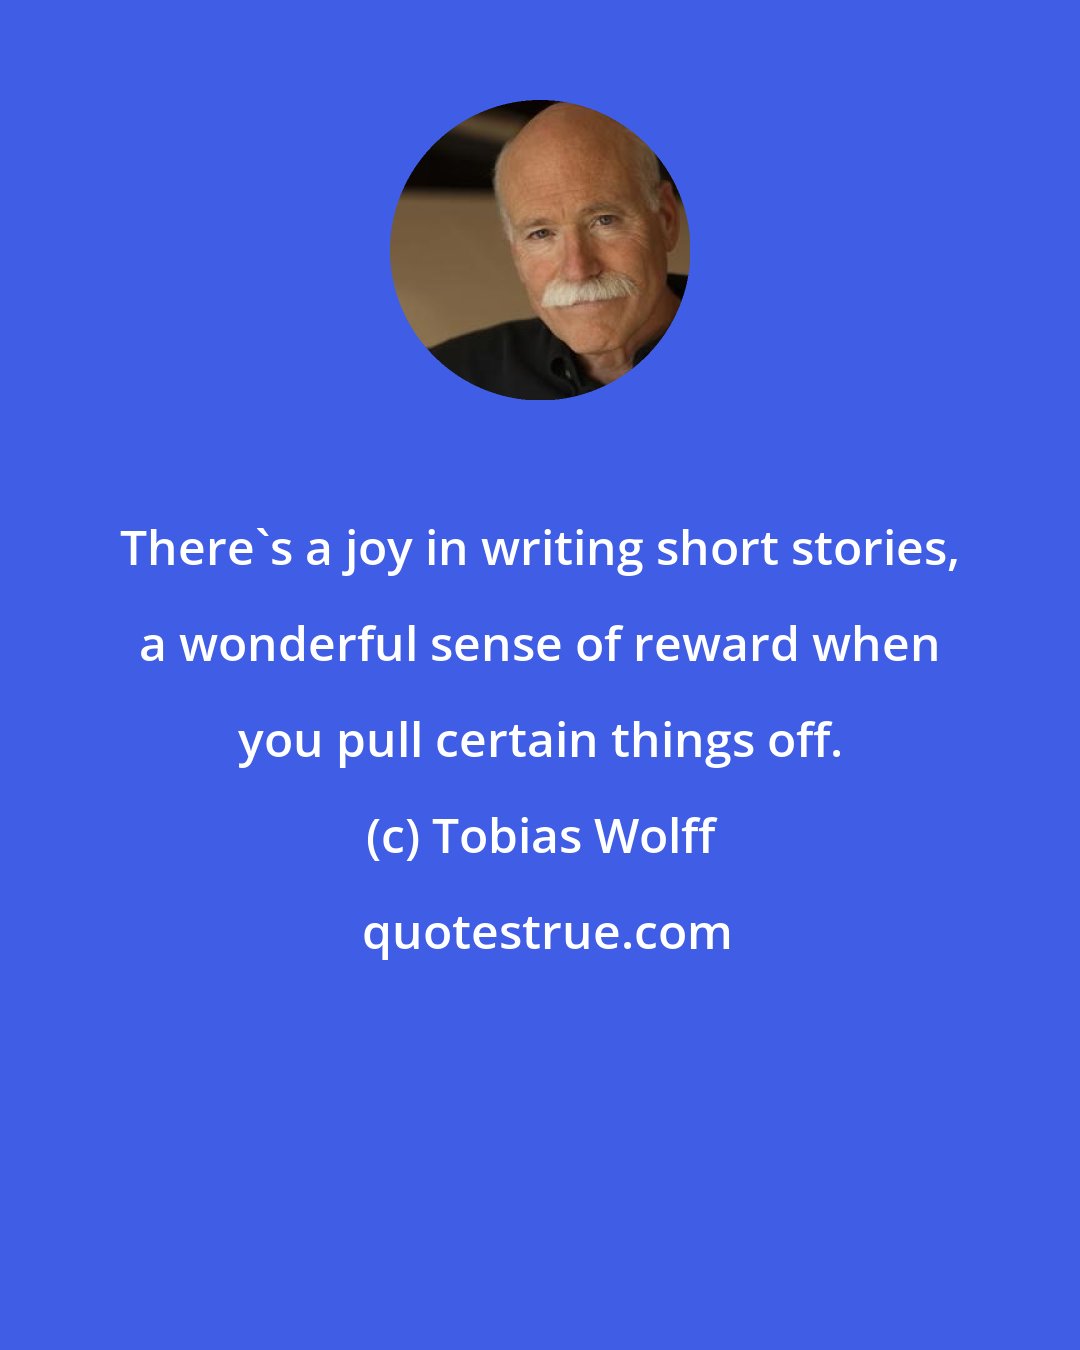 Tobias Wolff: There's a joy in writing short stories, a wonderful sense of reward when you pull certain things off.